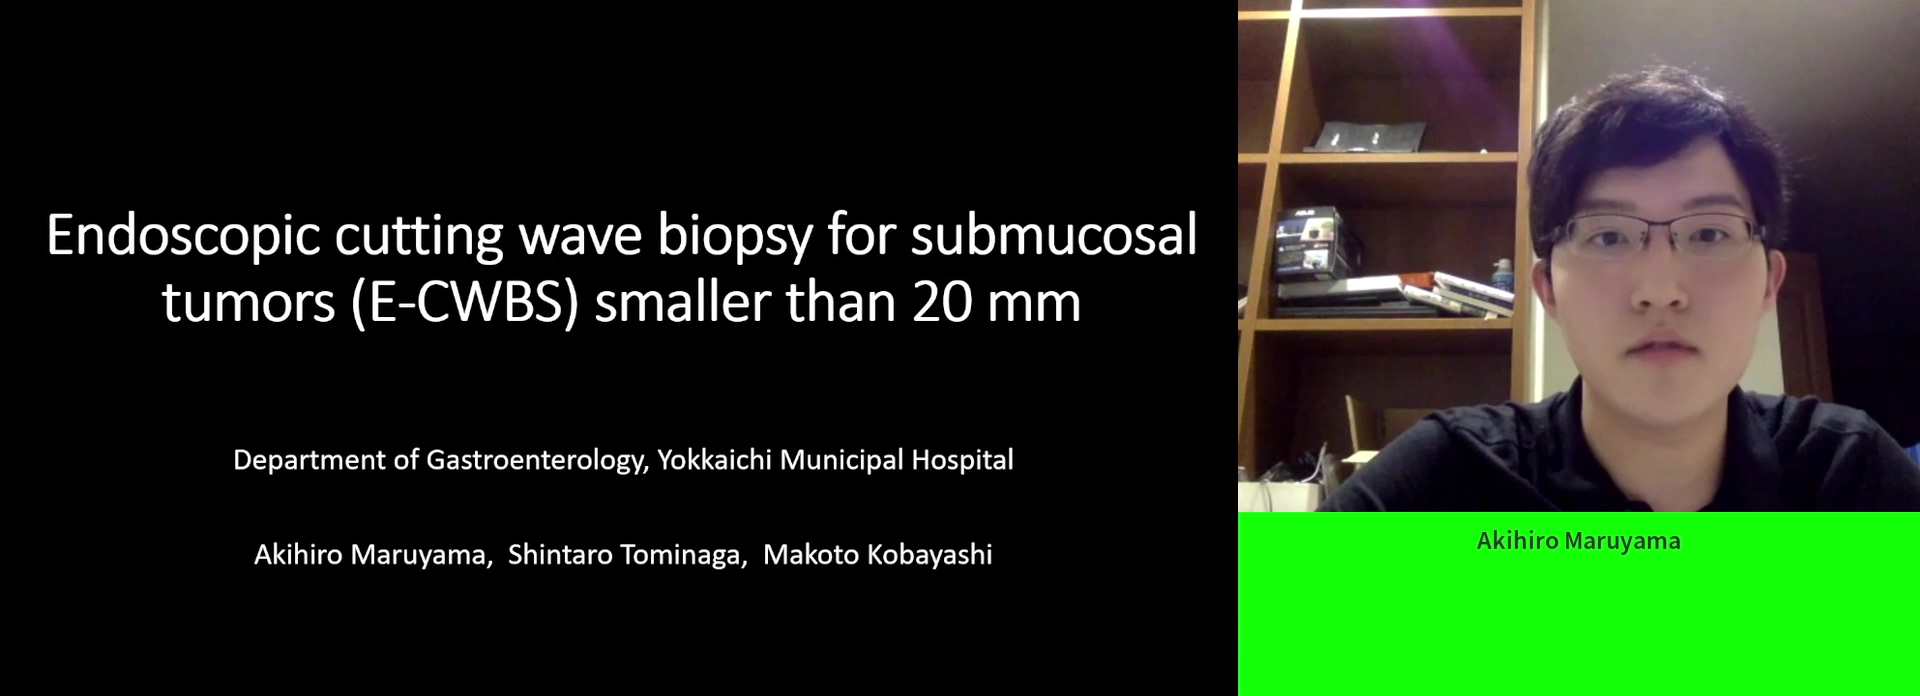 ENDOSCOPIC CUTTING WAVE BIOPSY FOR SUBMUCOSAL TUMORS SMALLER THAN 20 MM